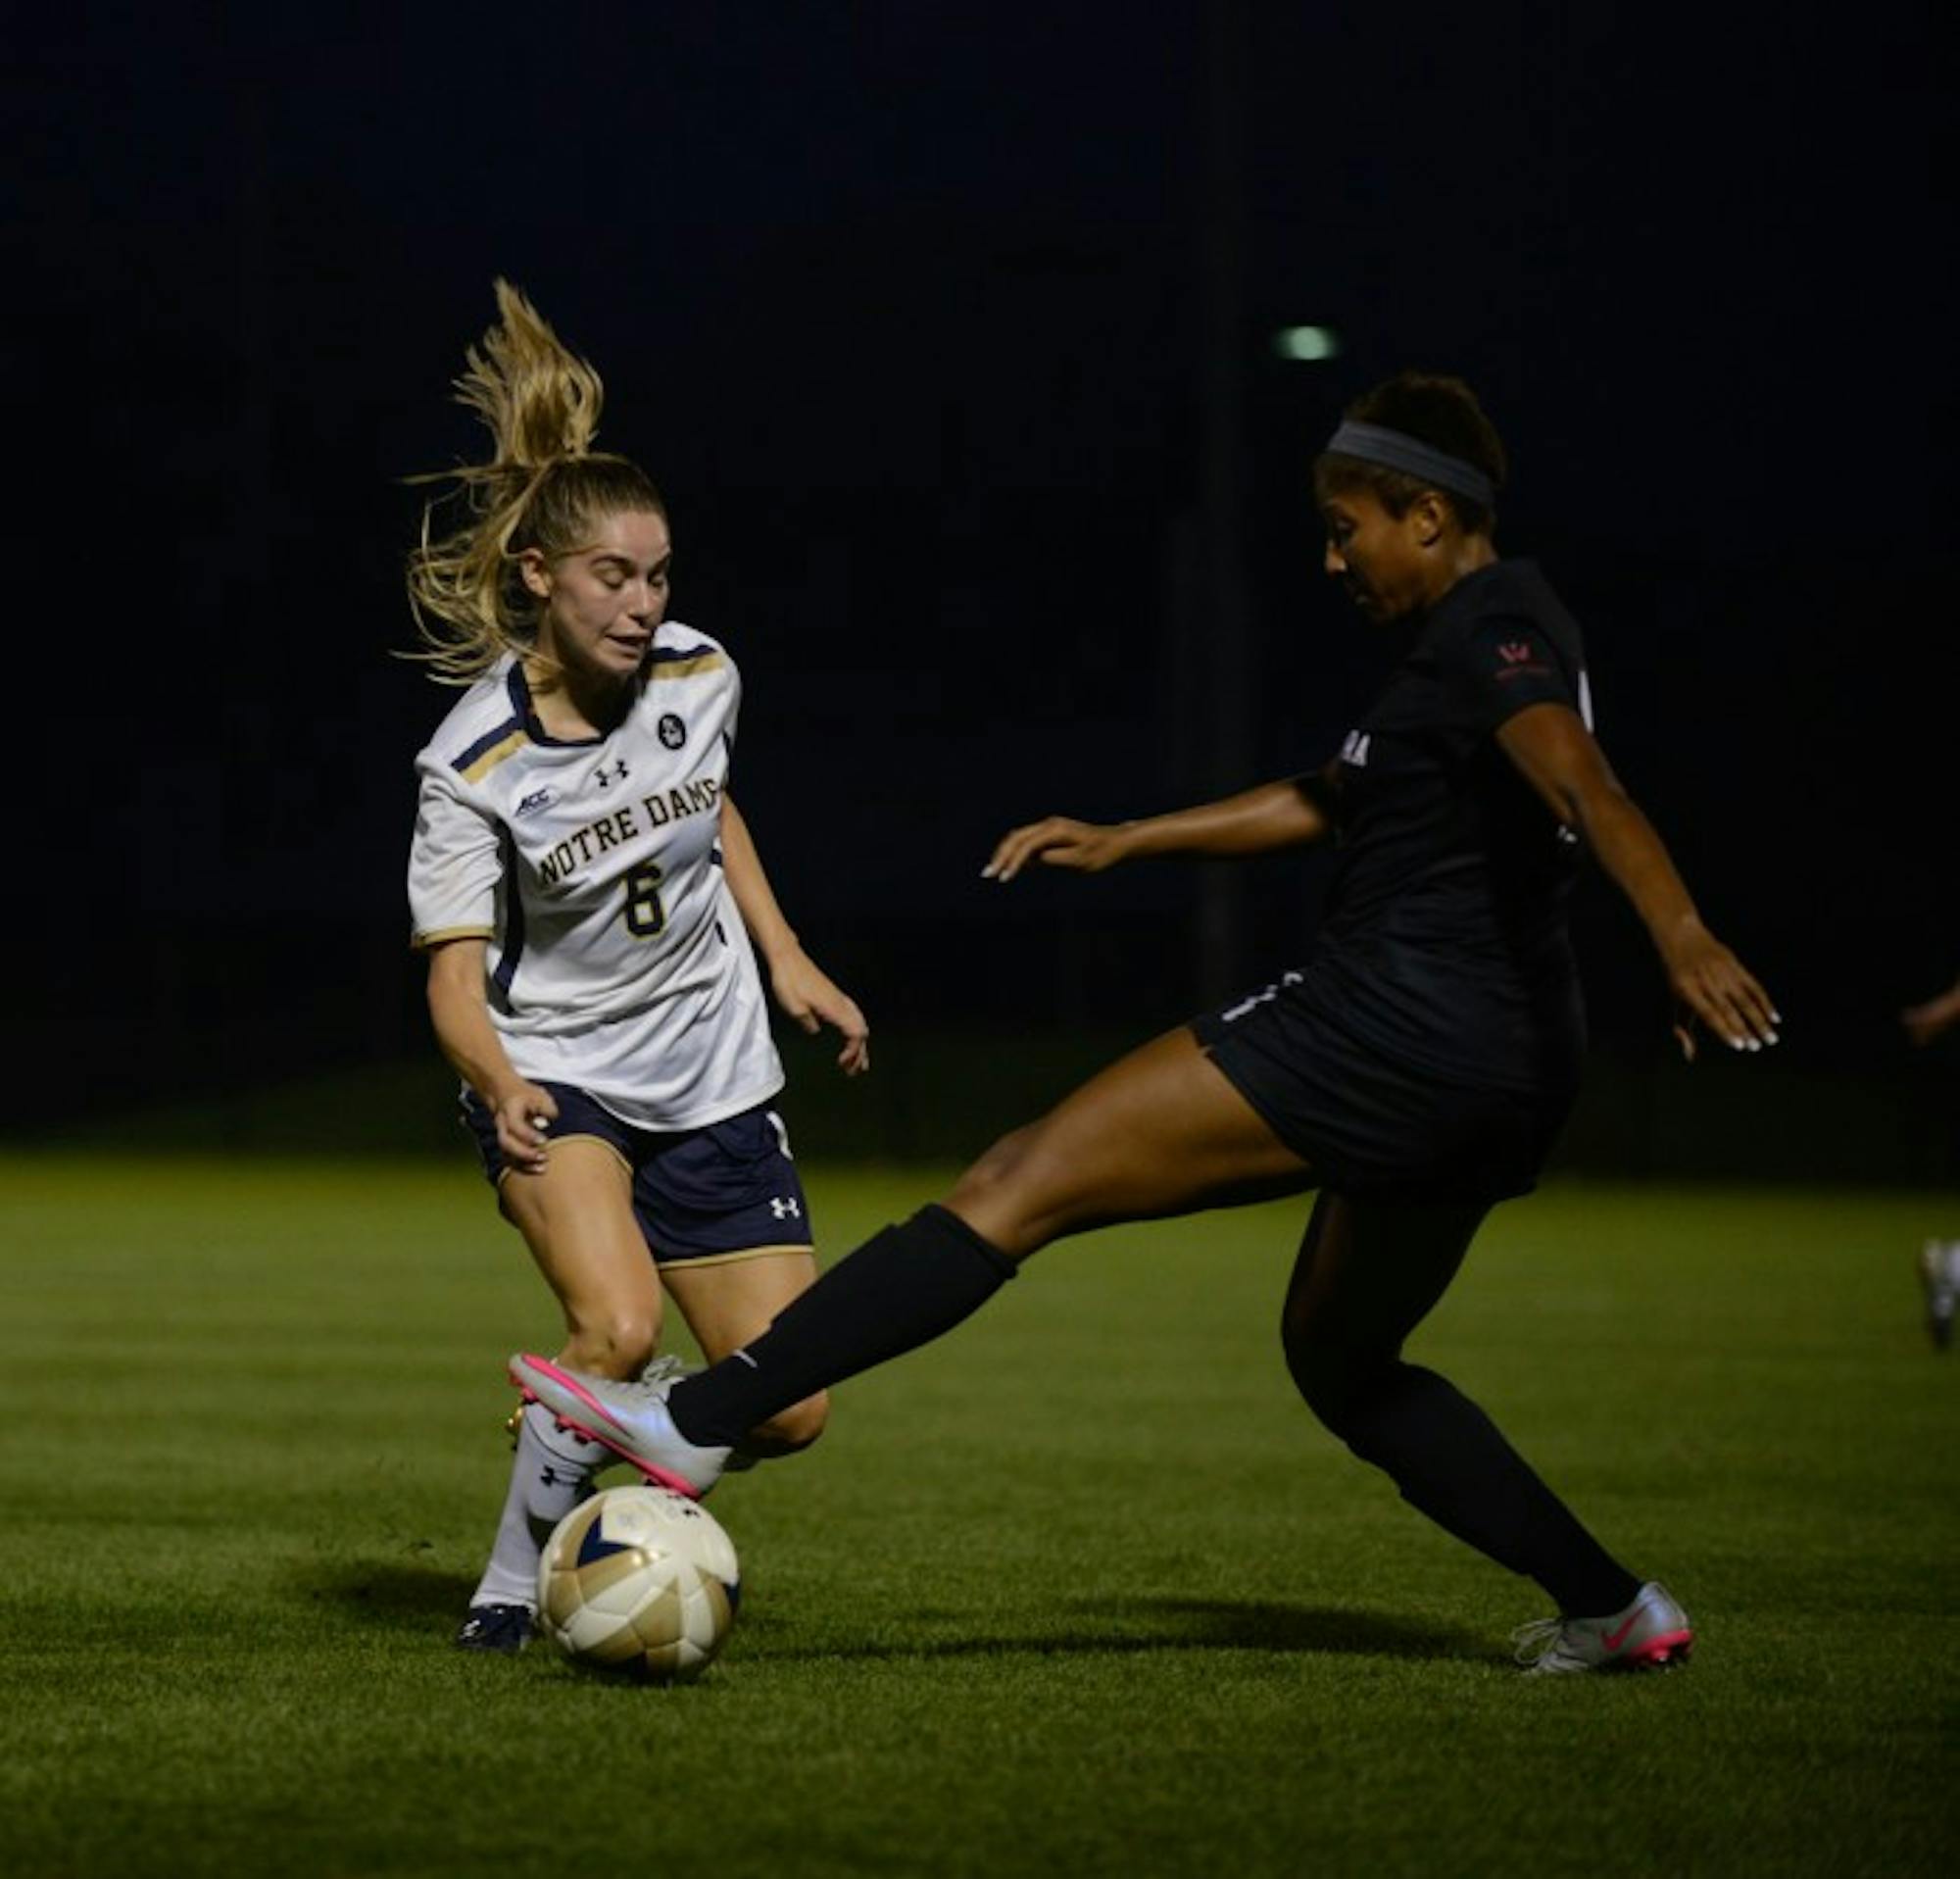 Irish senior forward Anna Maria Gilbertson attempts to dribble past a defender during Notre Dame’s 2-1 win over Santa Clara on Aug. 28.